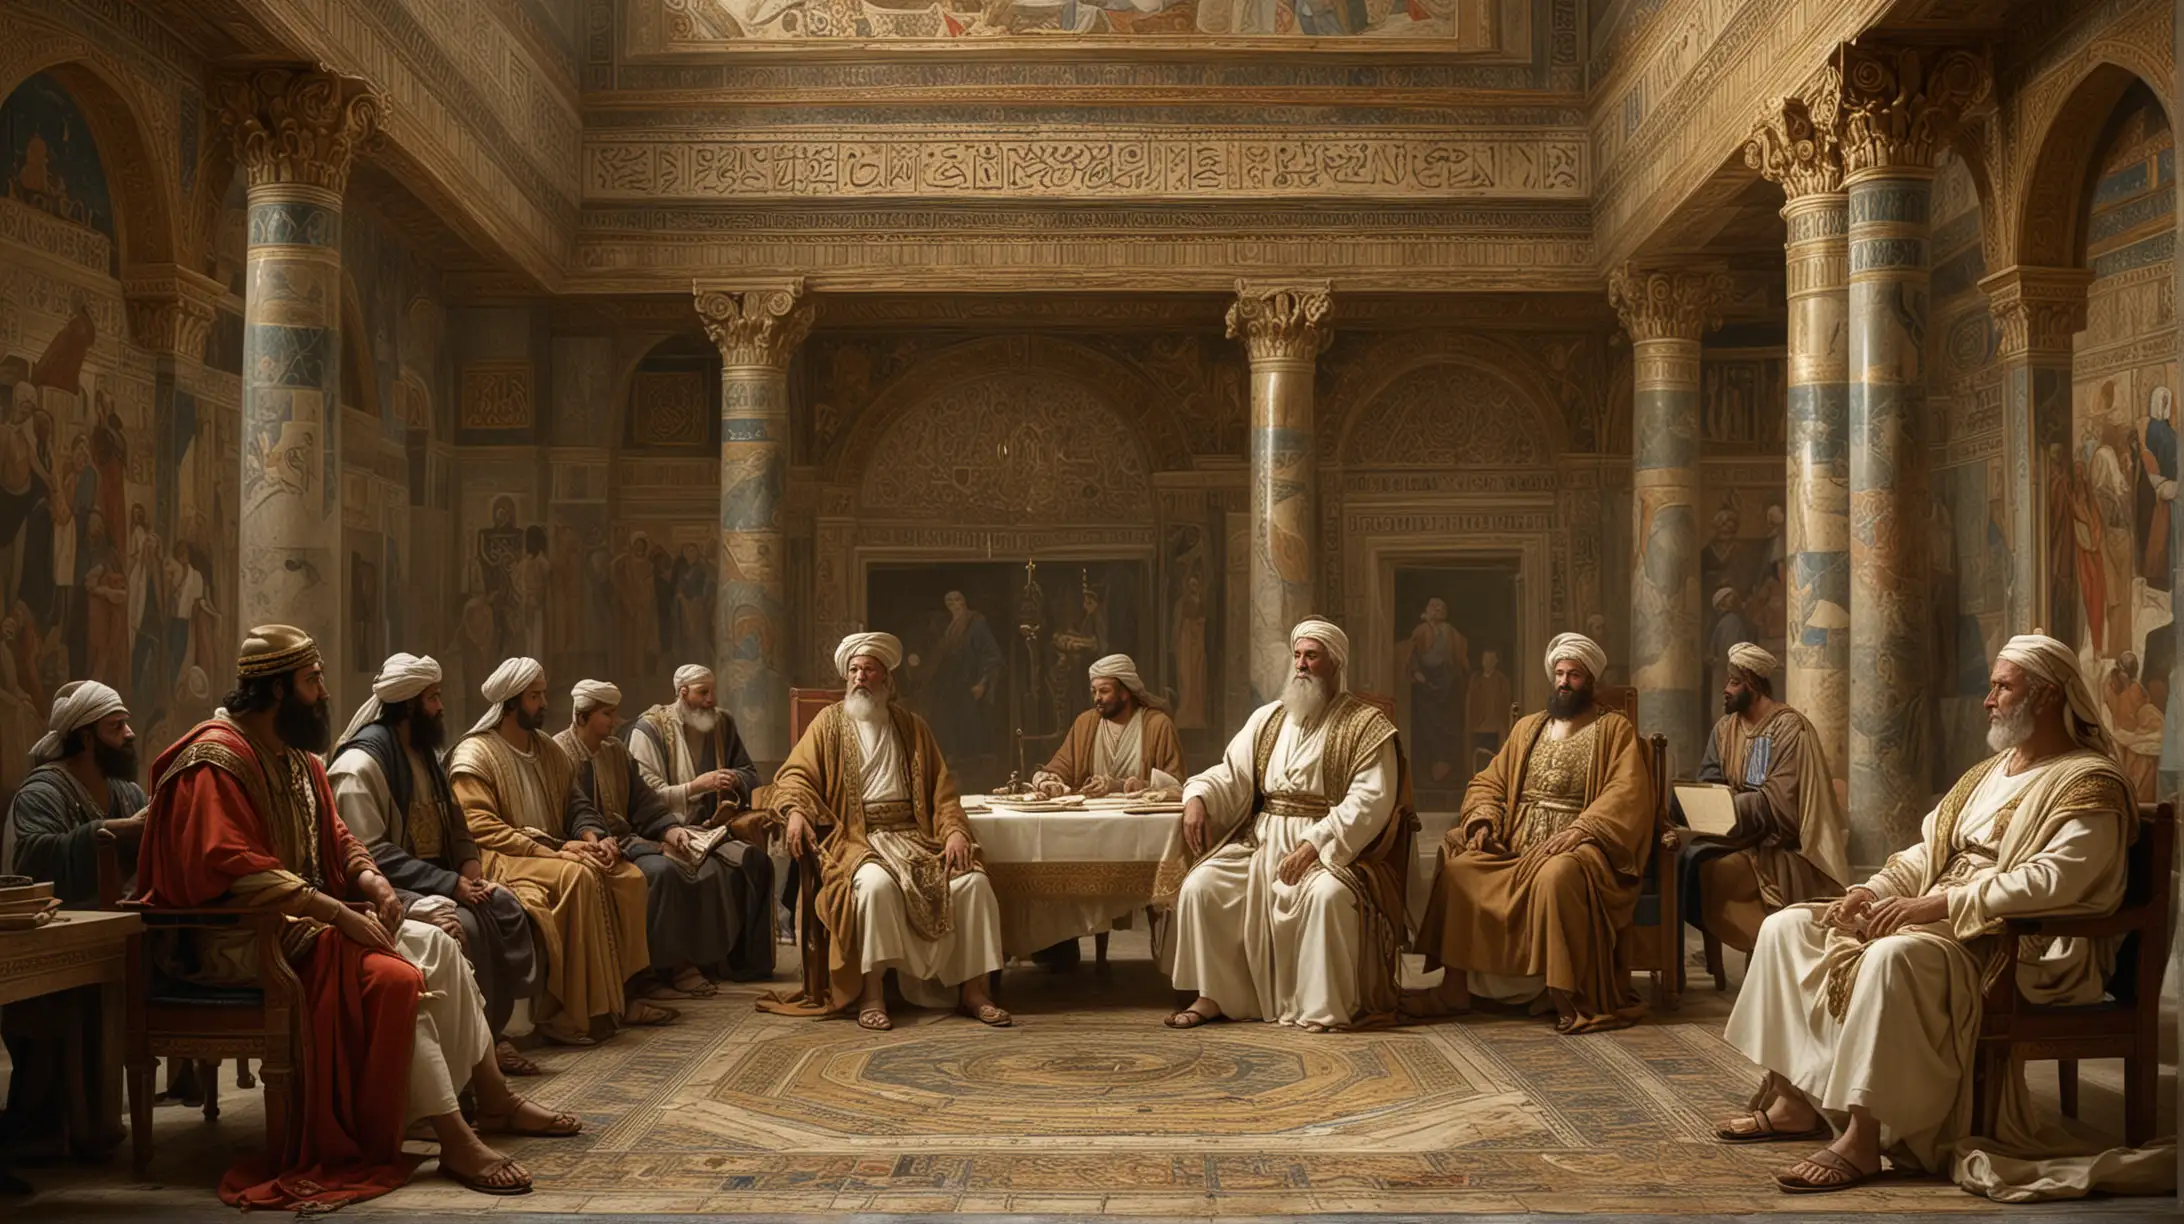 King Solomon Negotiating Diplomatic Alliances in His Opulent Palace